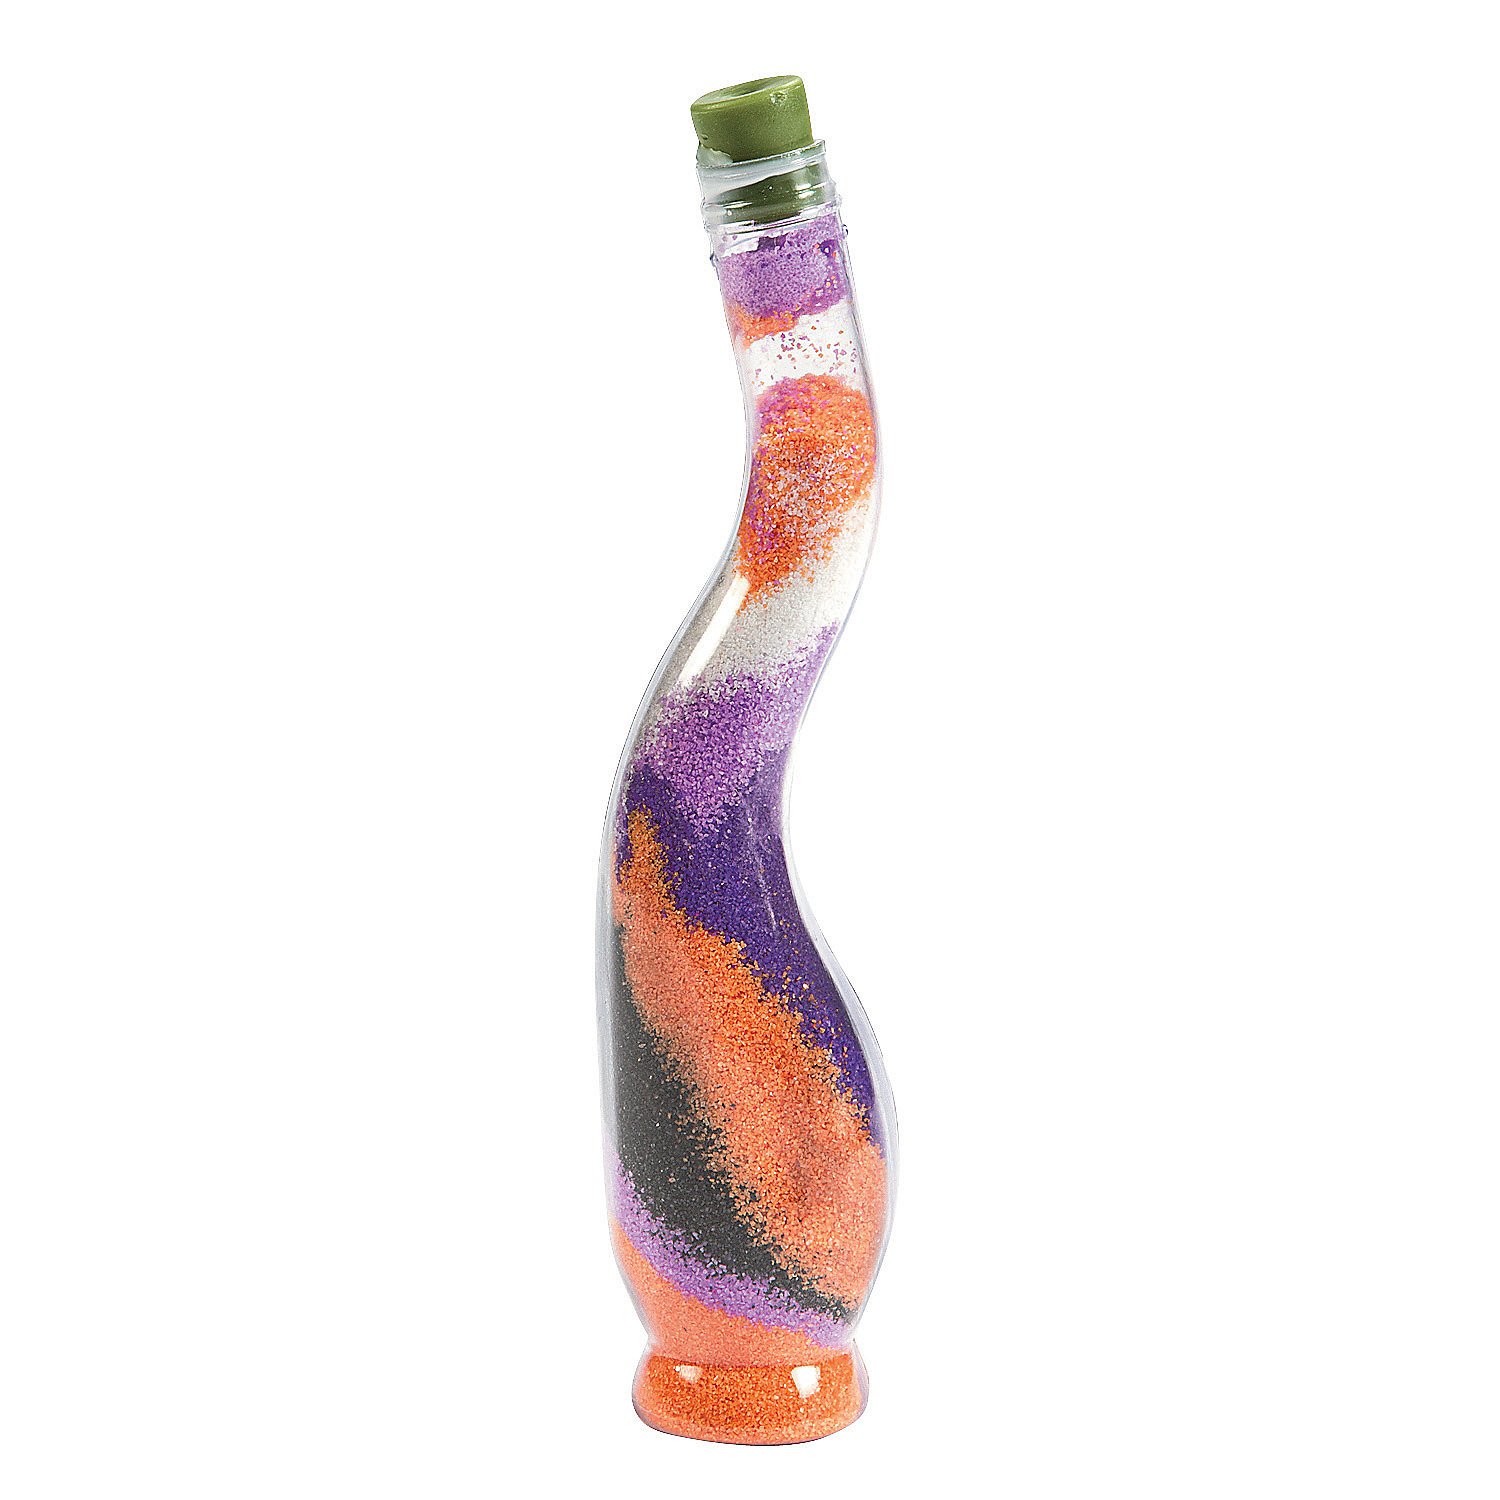 Long Neck Sand Art Bottle - Crafts for Kids and Fun Home Activities - 12 Pcs.